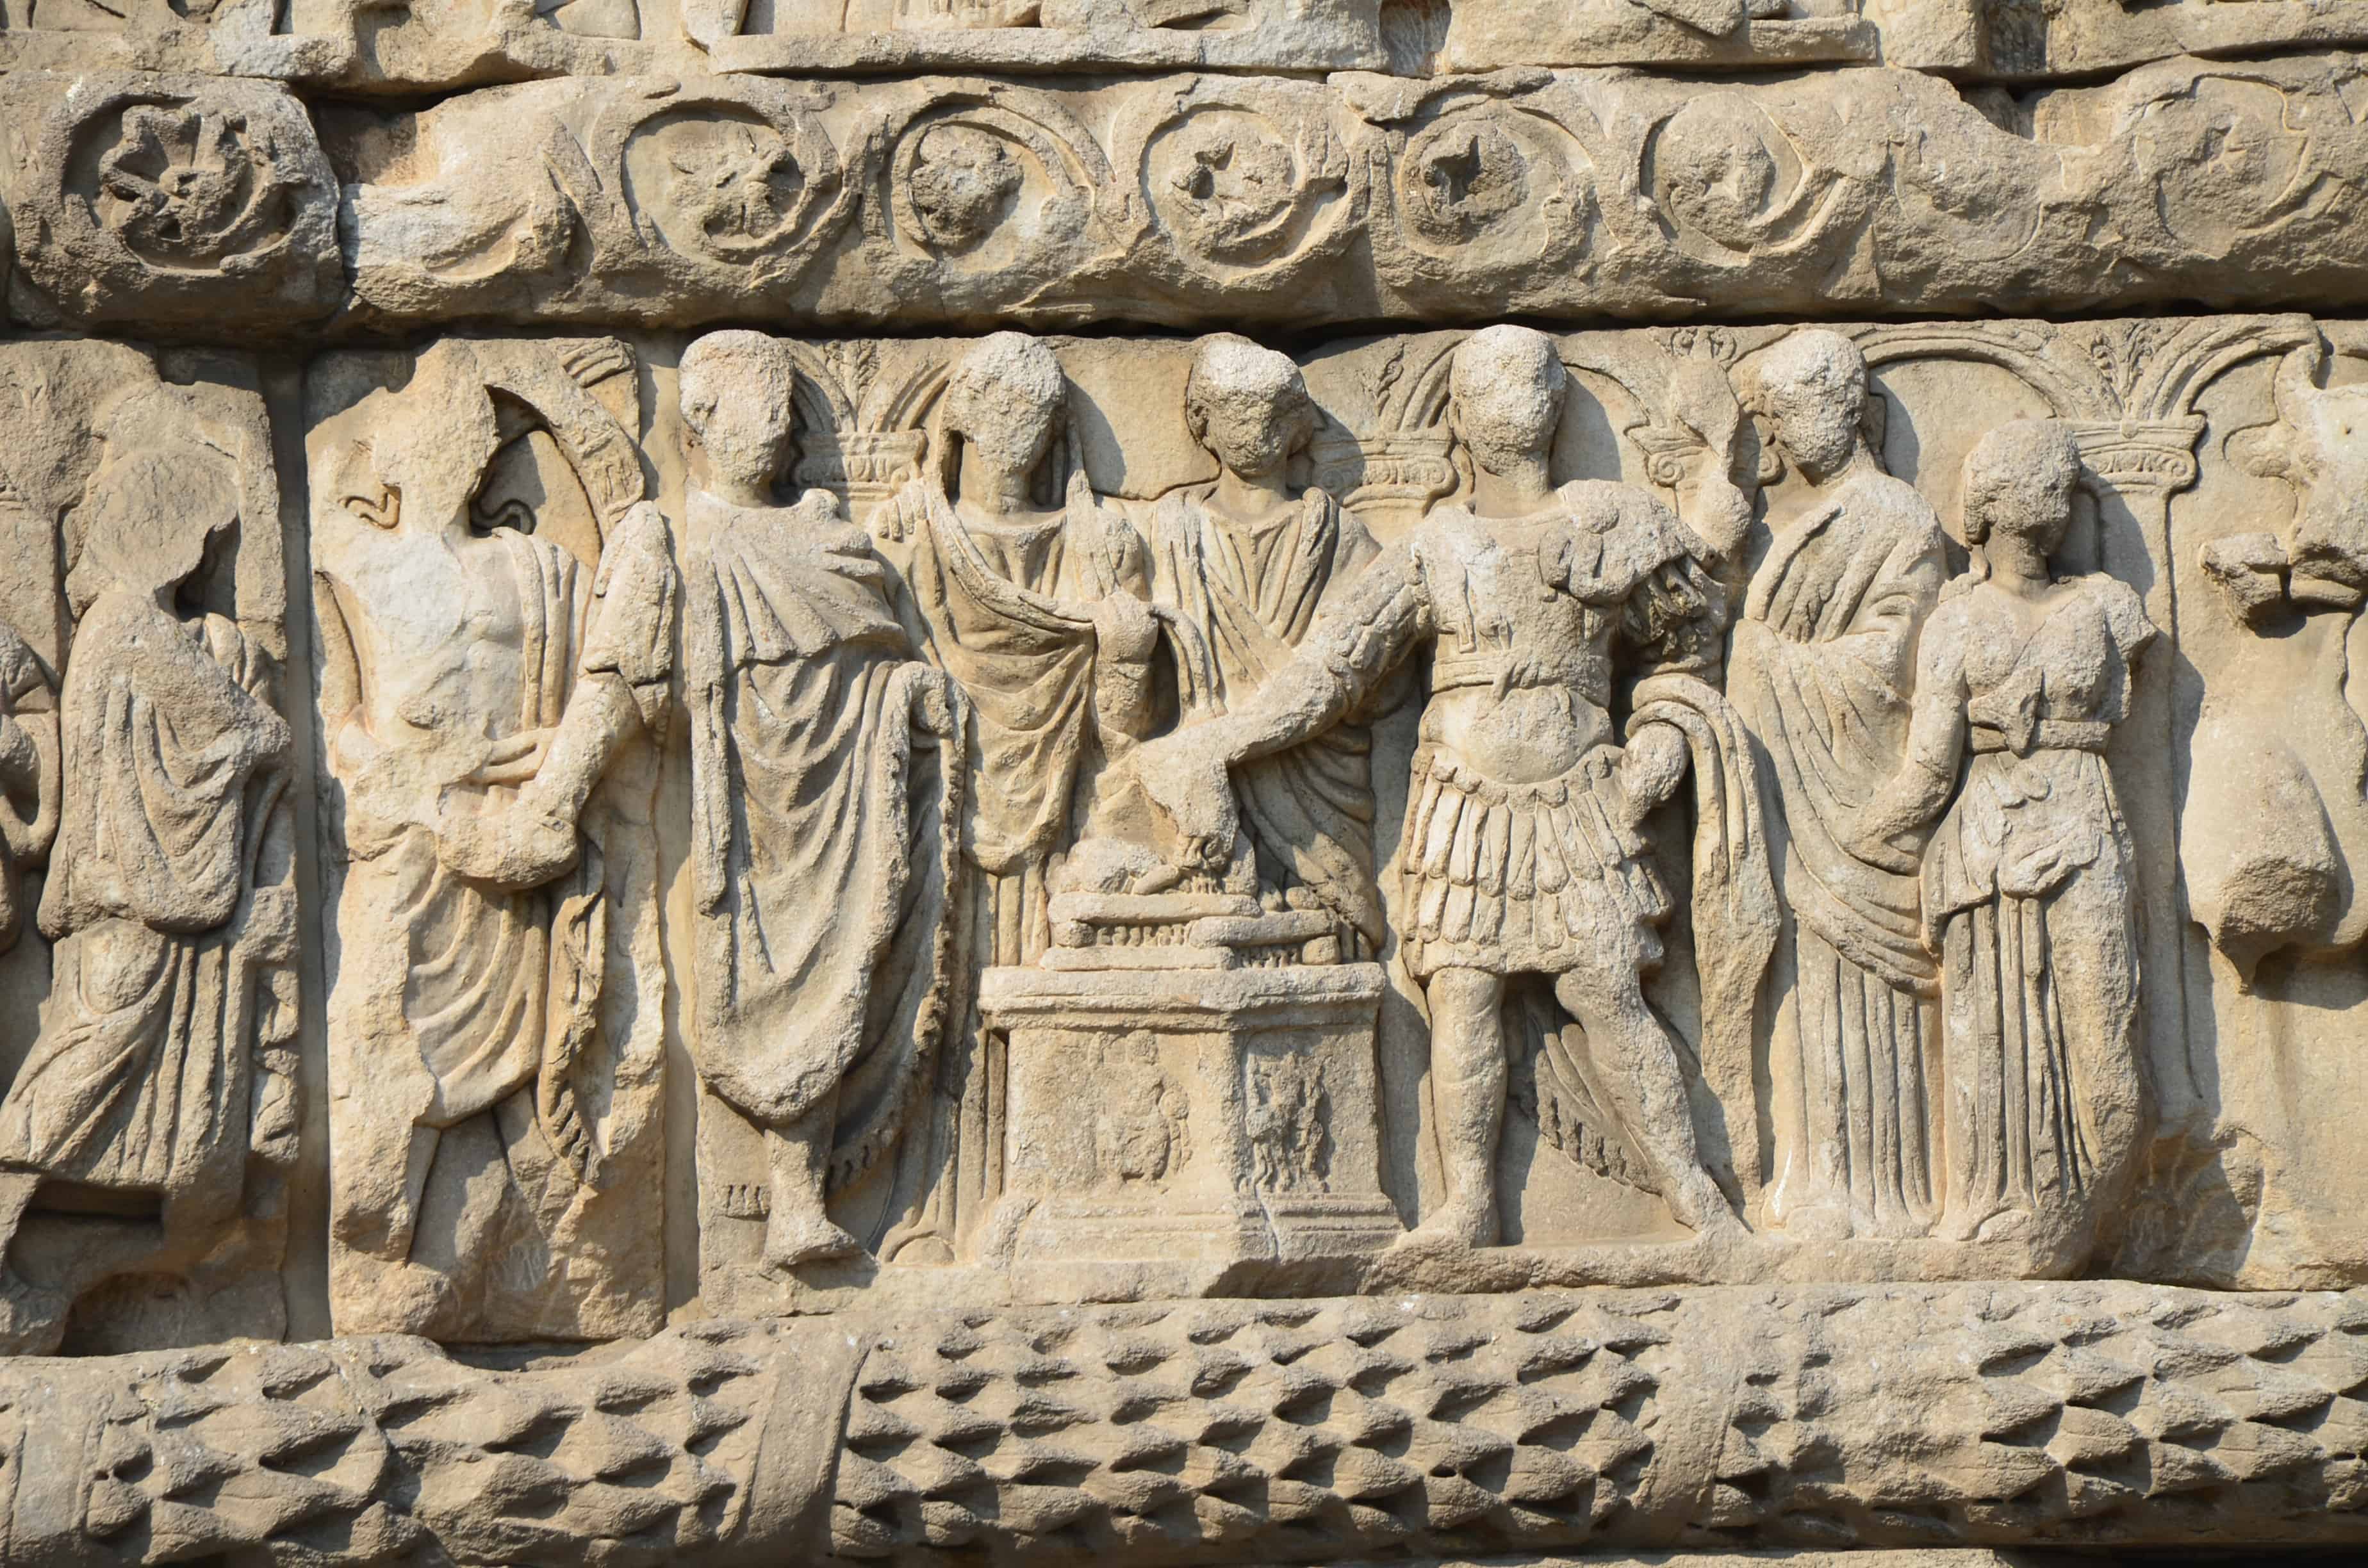 The imperial family at the sacrifice of thanksgiving on the Arch of Galerius in Thessaloniki, Greece